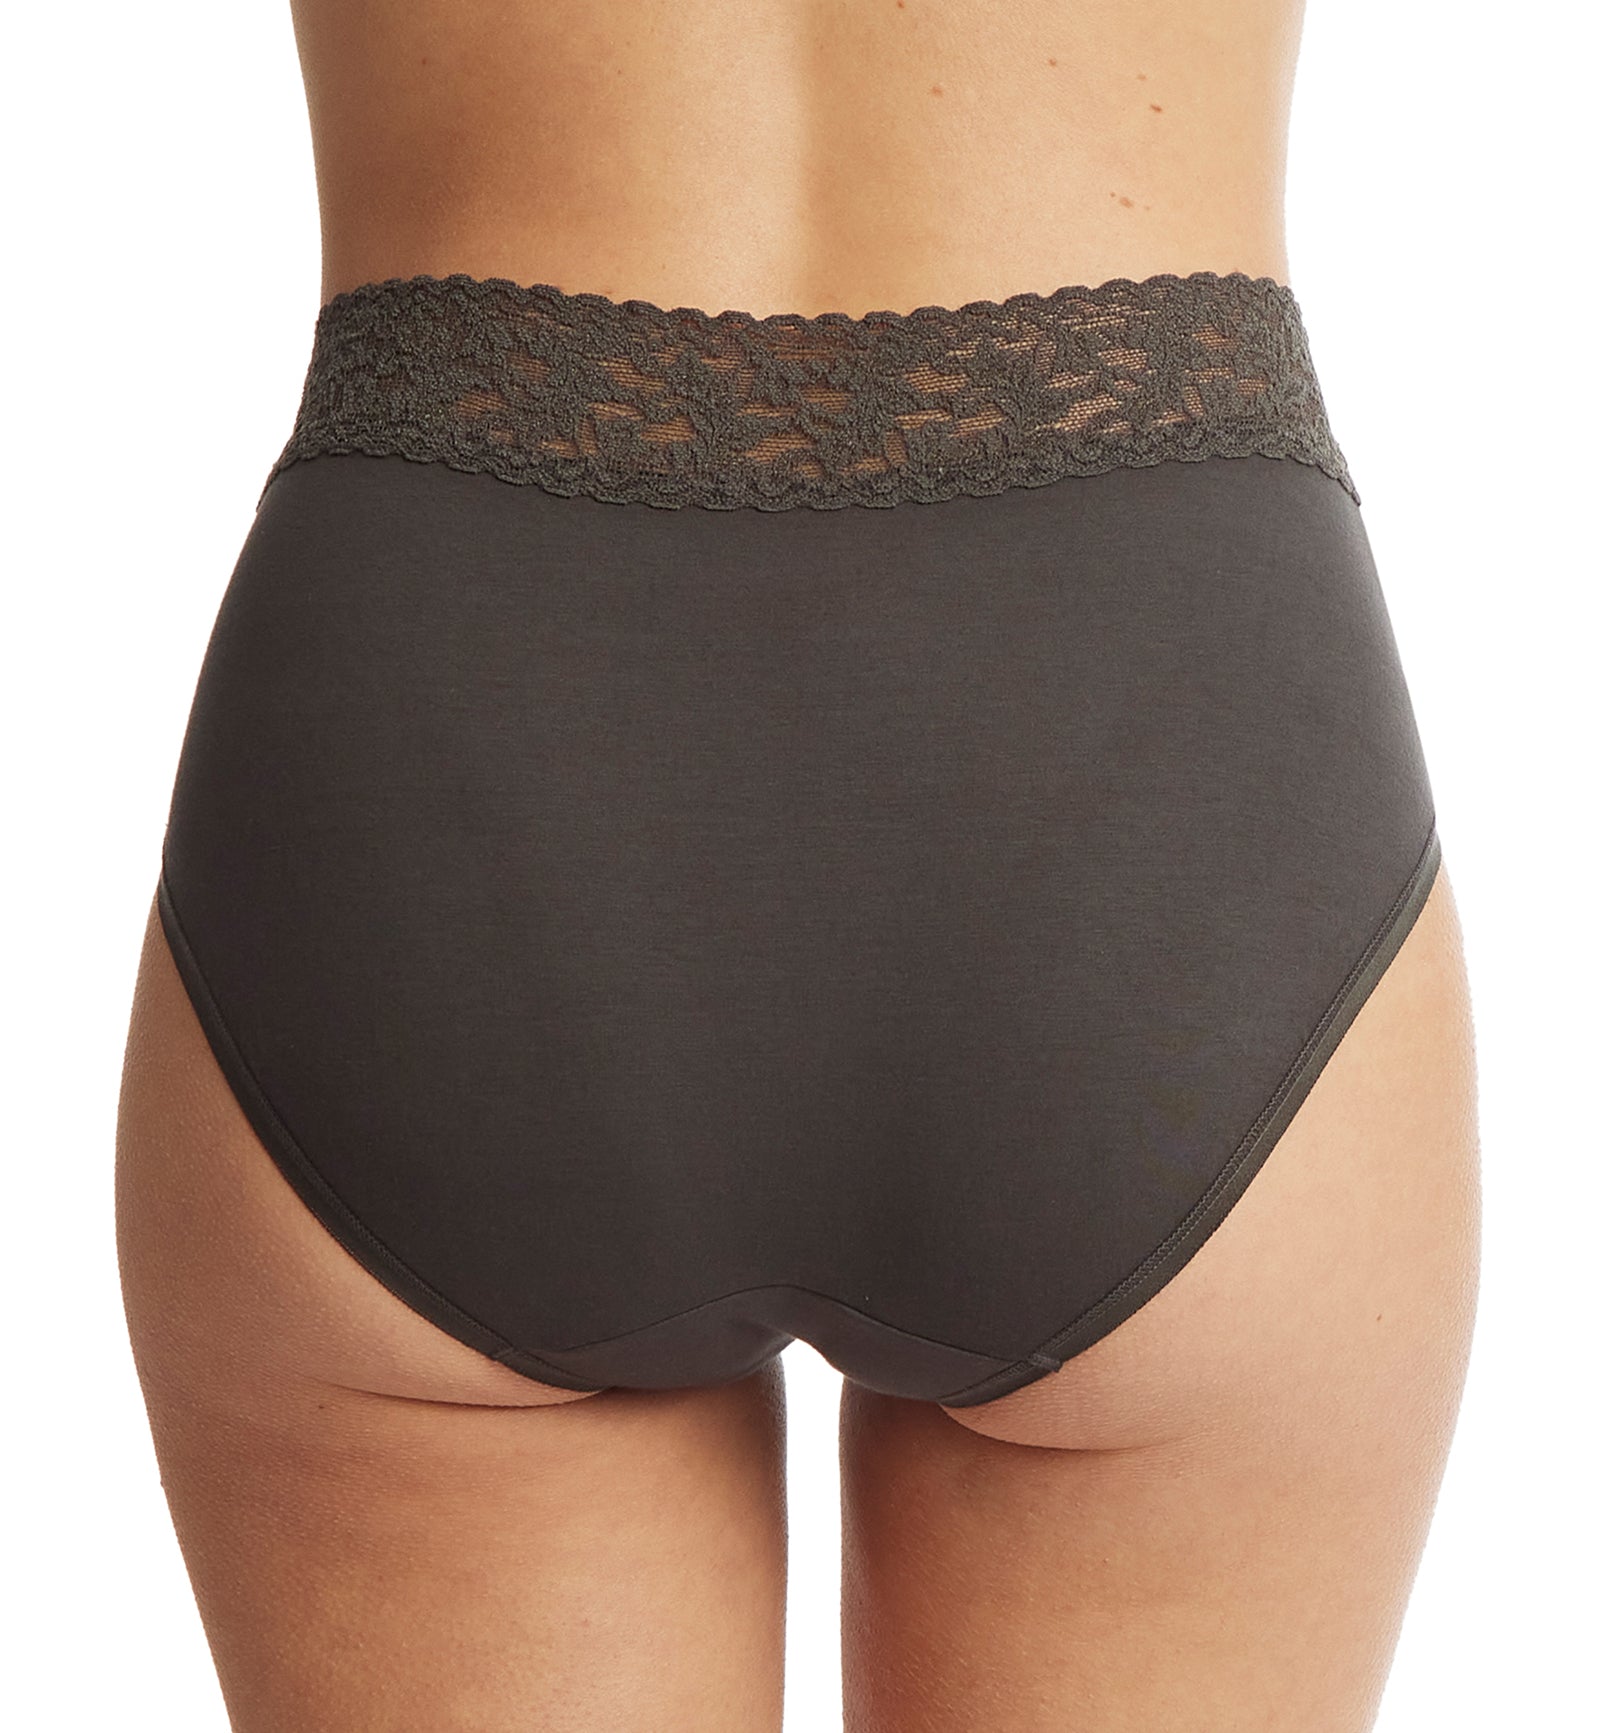 Hanky Panky Cotton French Brief with Lace (892461),Small,Granite - Granite,Small